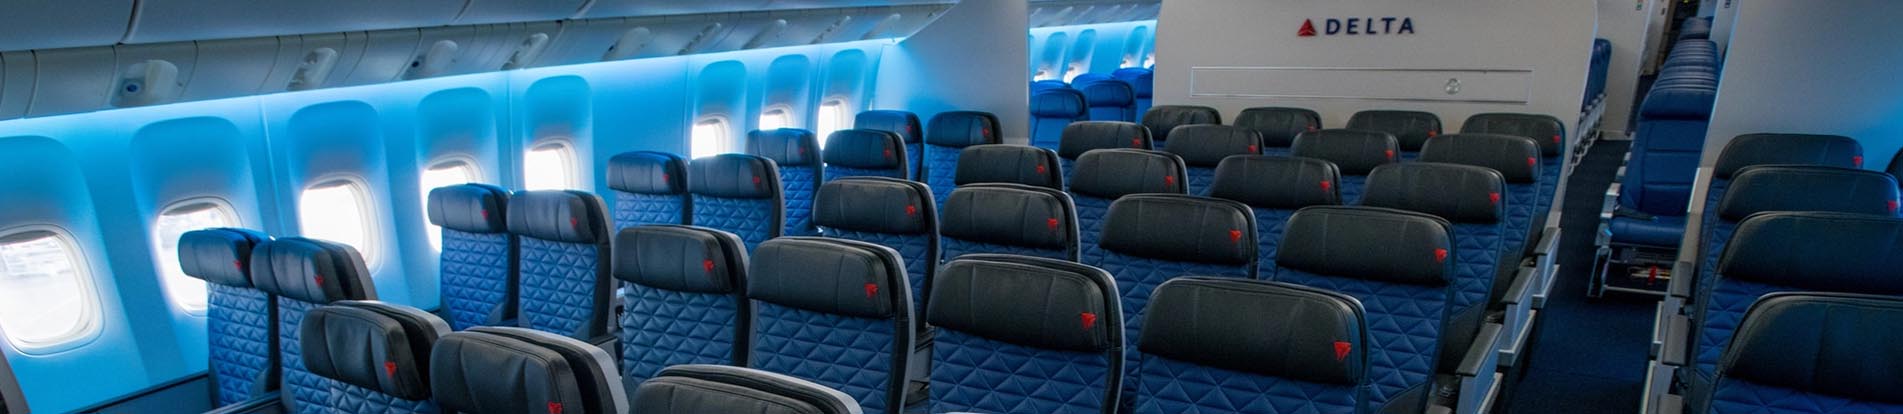 What Safety Measures Taken By Delta On Domestic And International Flights?